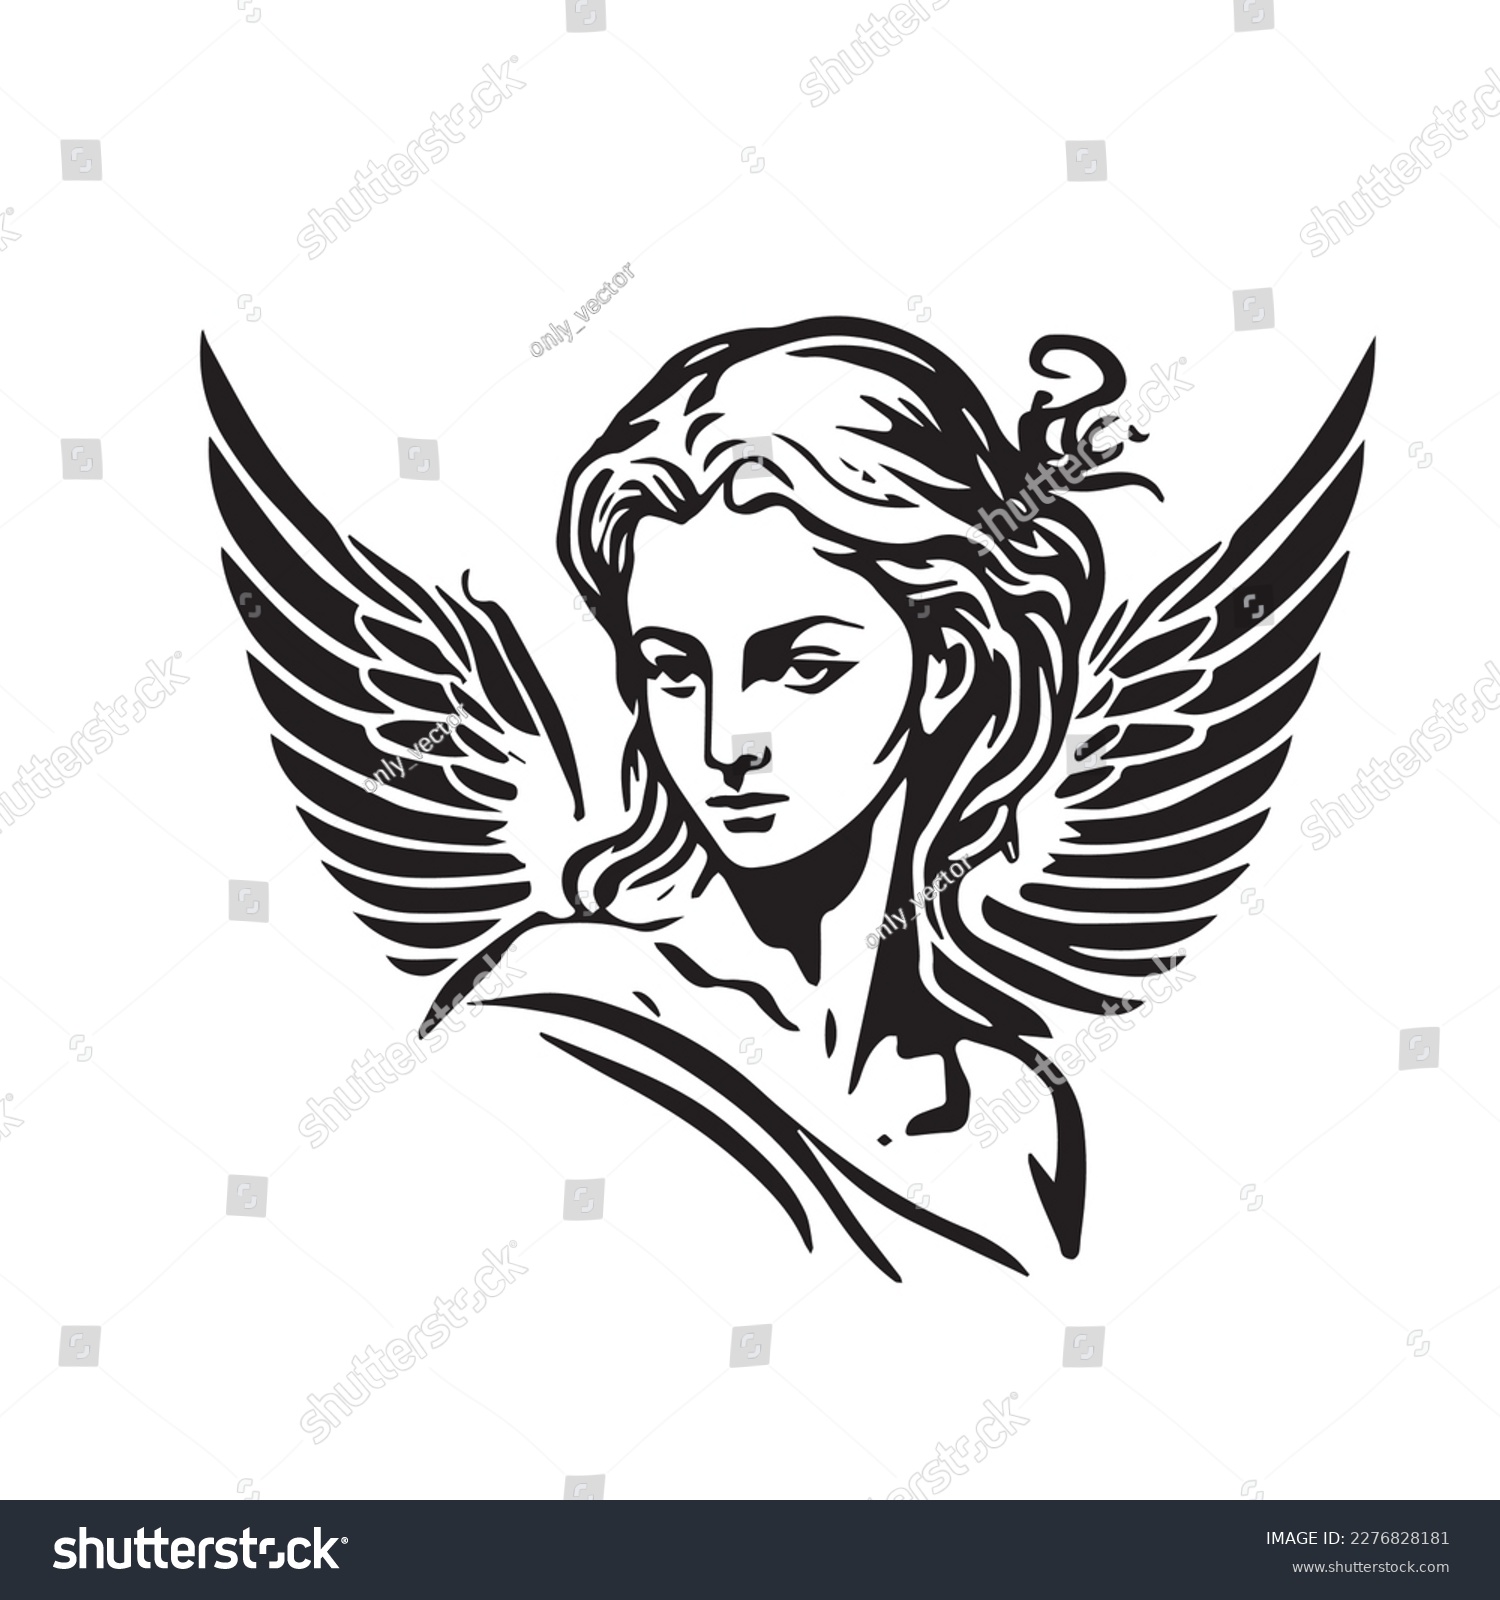 SVG of Angel woman head logo. Vector illustration of female face. Silhouette svg, only black and white. svg